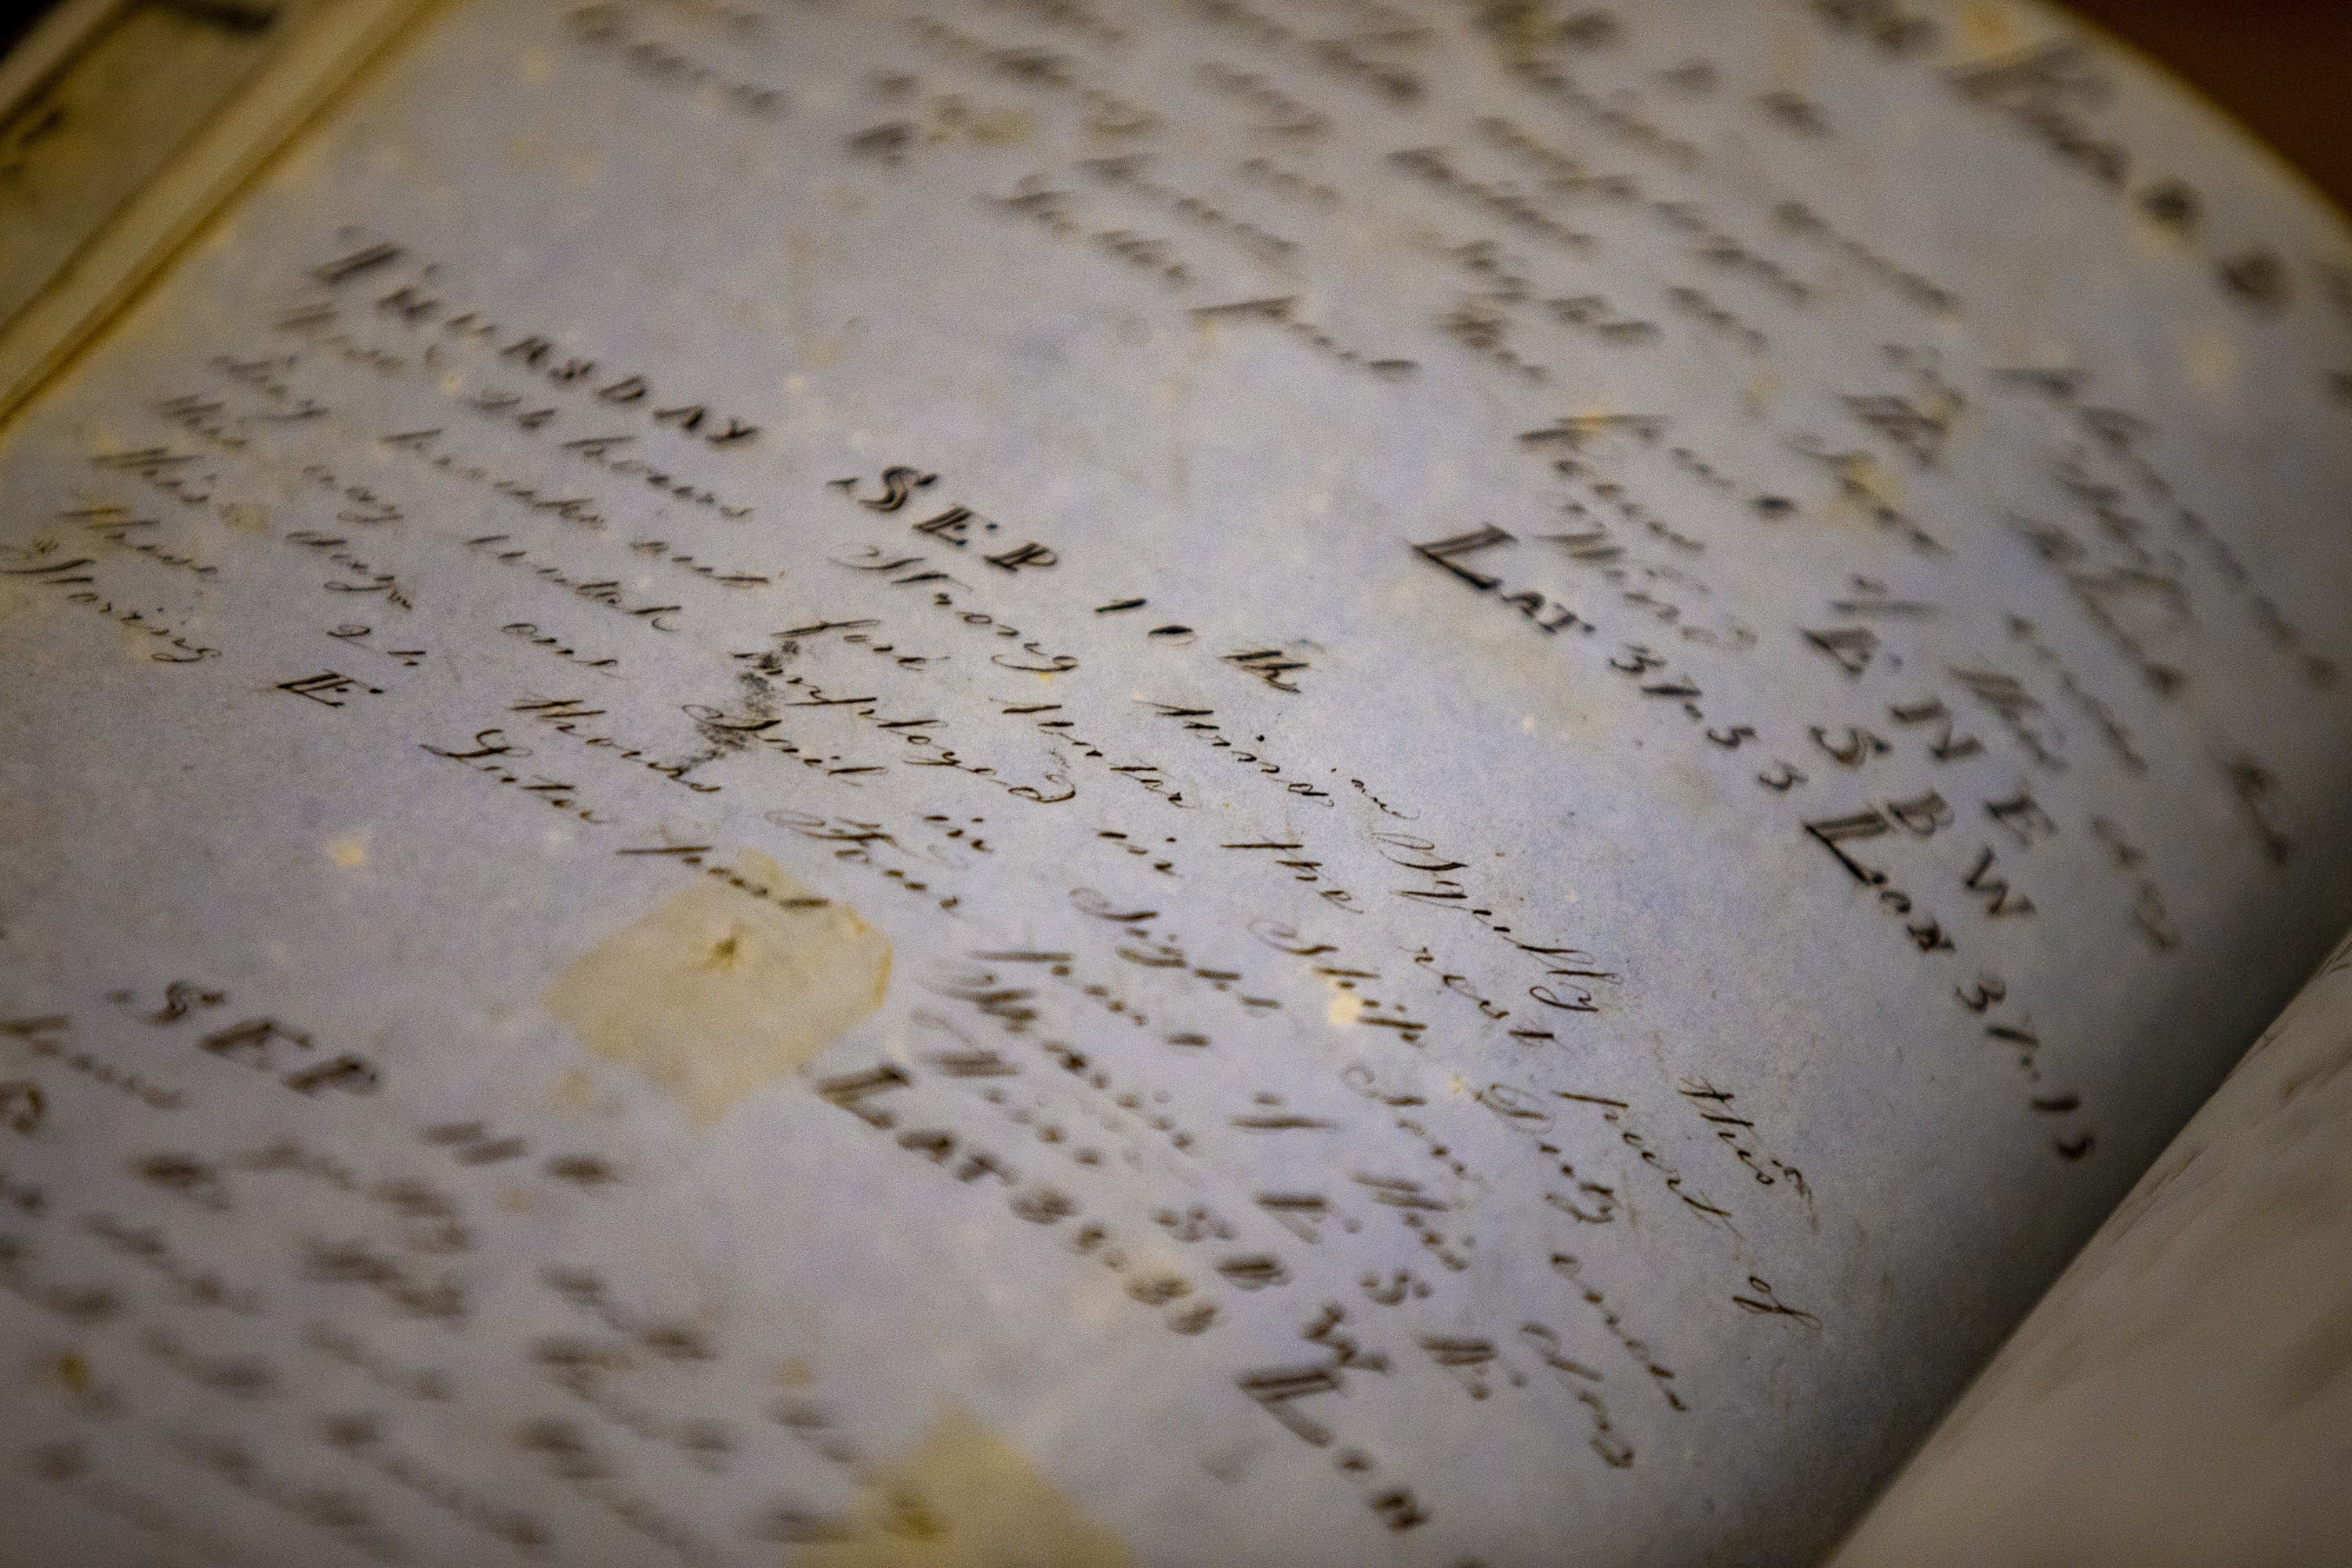 Entries in the log book of the brig Thomas Winslow from 1846-1847 at the Providence Public Library, which owns one of the five largest collections of whaling log books in the country. (Jesse Costa/WBUR)